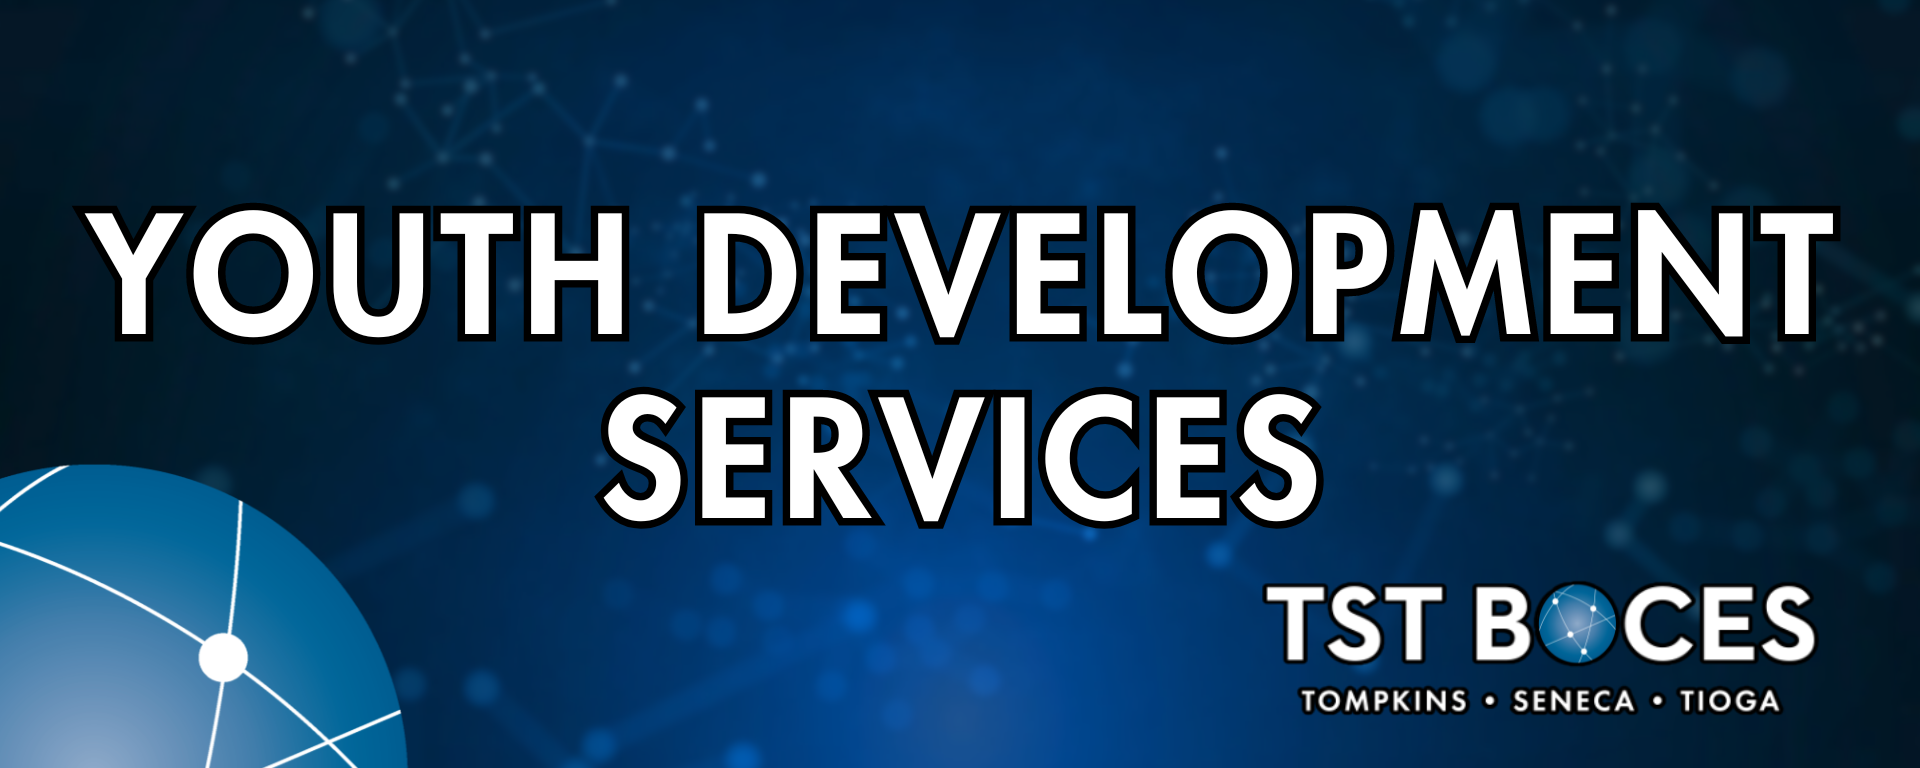 Youth development services banner